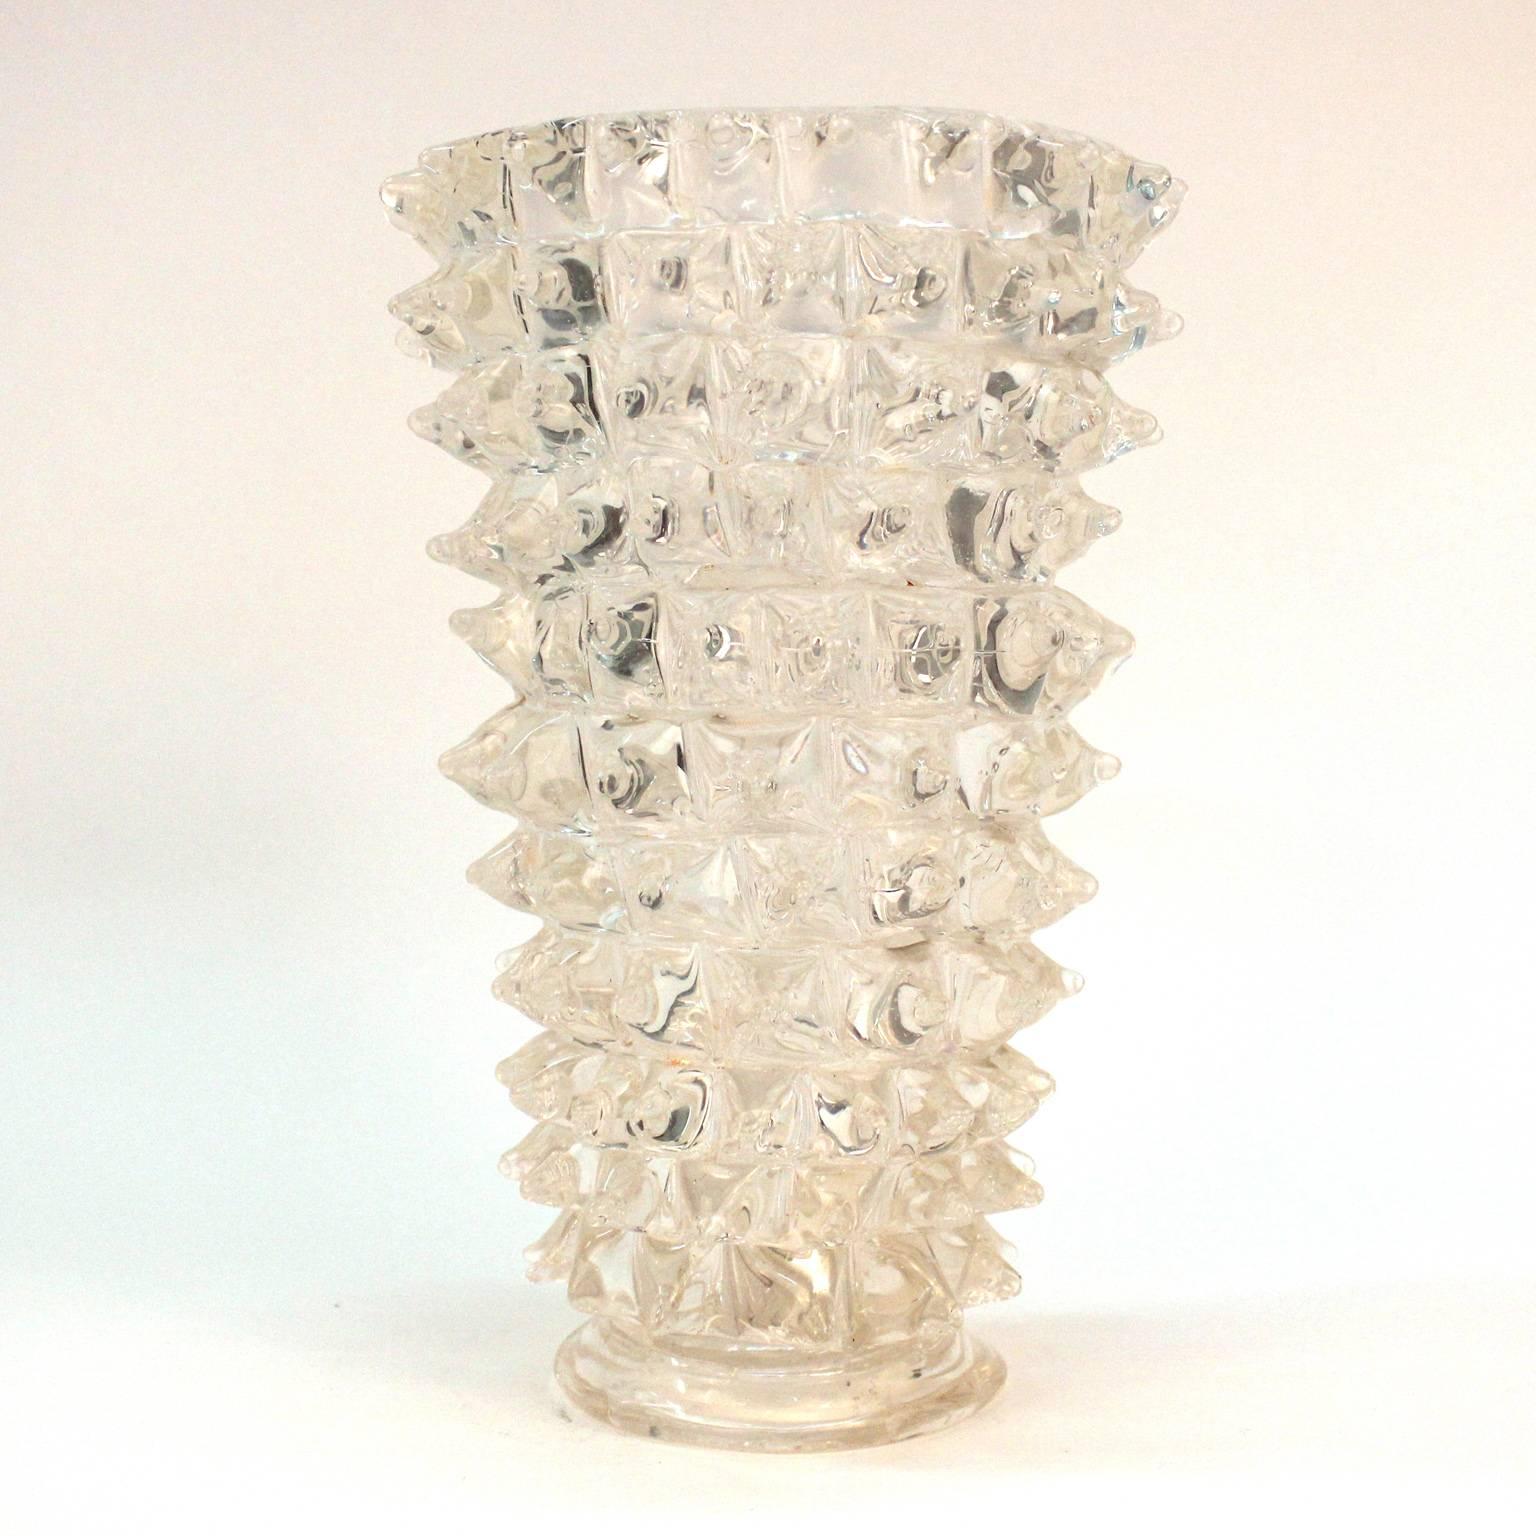 A 1938 Modernist Italian Murano glass vase made with the rostrato technique by Ercole Barovier. The piece is in good condition, with minor flakes on one of the points. Unsigned.